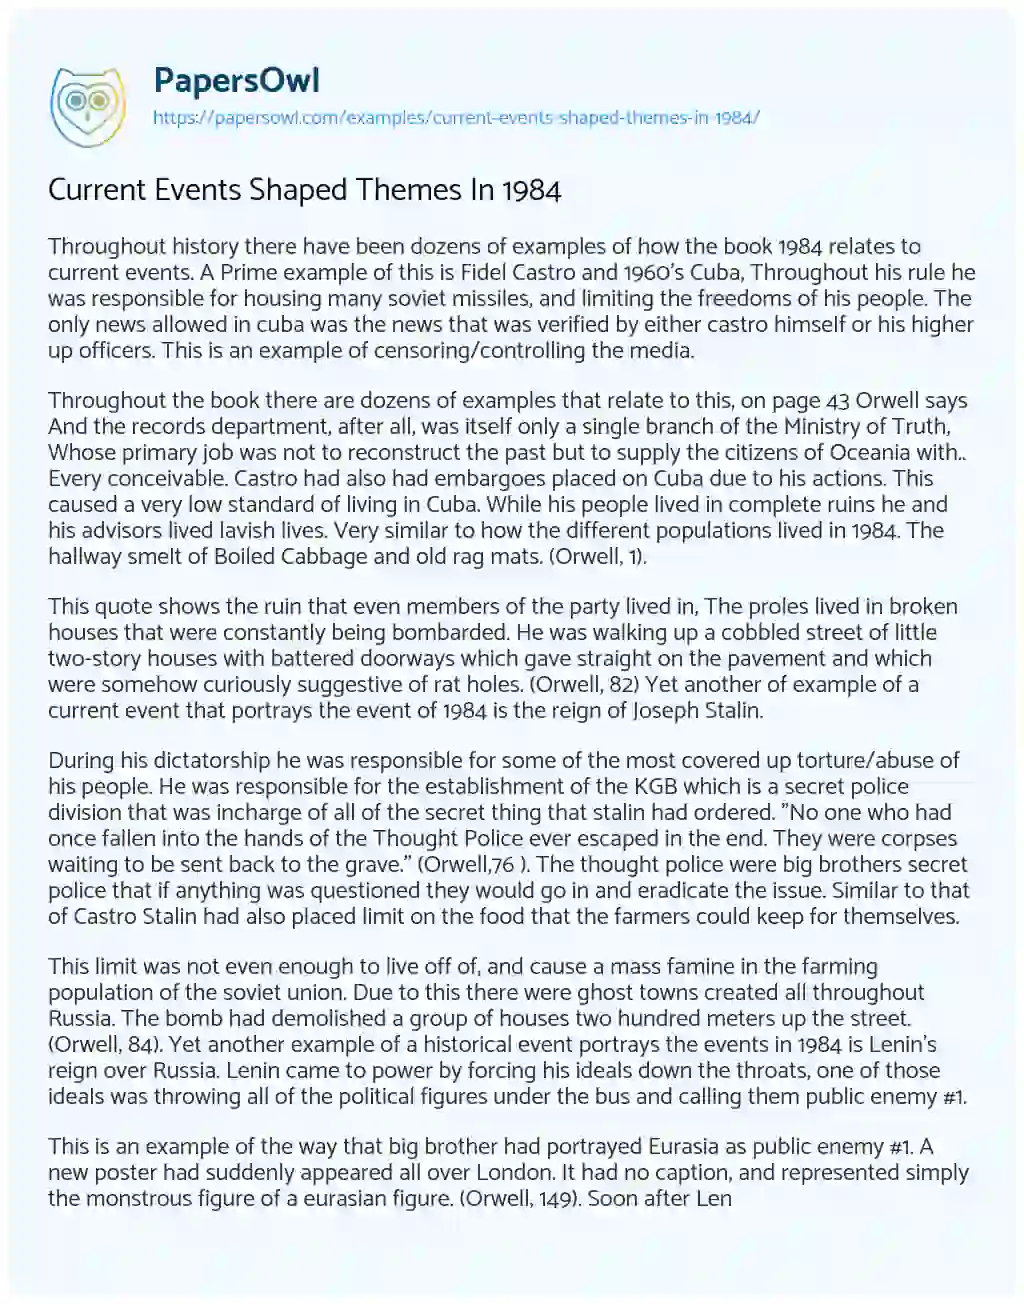 Current Events Shaped Themes in 1984 essay